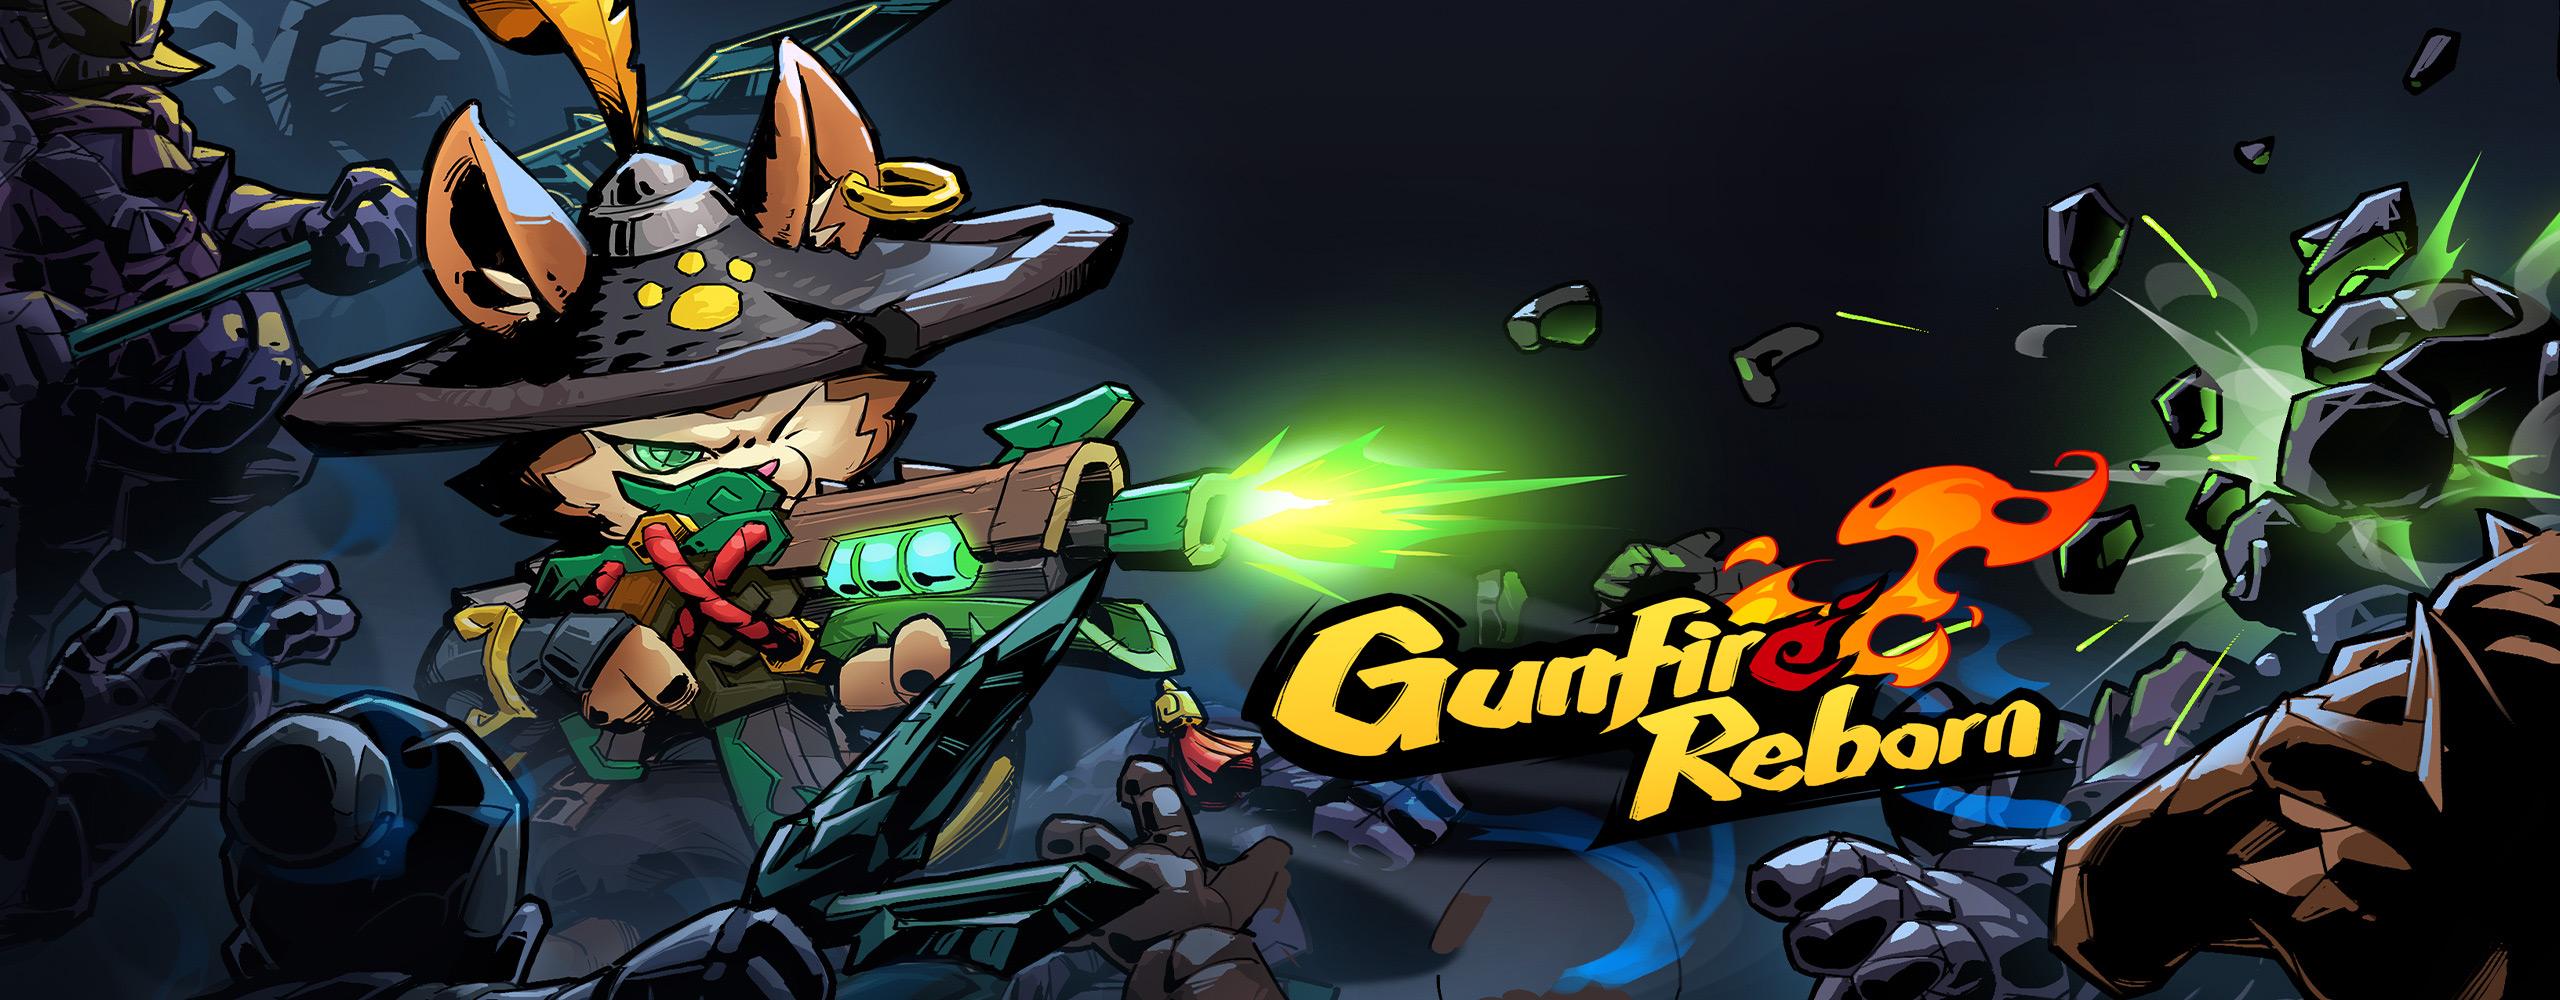 Gunfire Reborn Launches on PlayStation 4 & 5 Today!